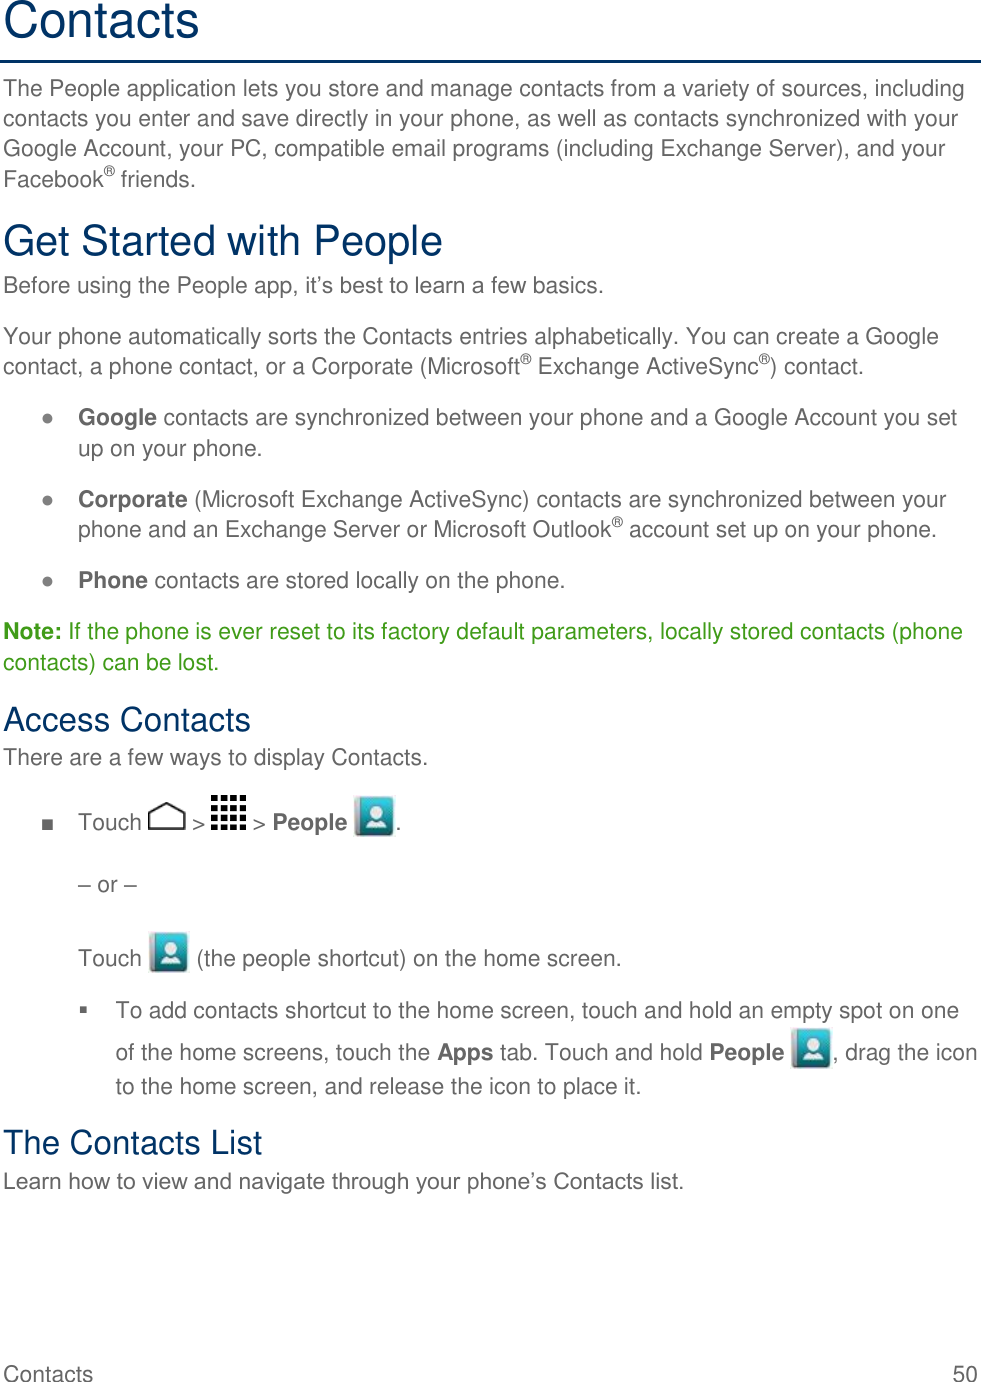 Contacts    50 Contacts The People application lets you store and manage contacts from a variety of sources, including contacts you enter and save directly in your phone, as well as contacts synchronized with your Google Account, your PC, compatible email programs (including Exchange Server), and your Facebook® friends.  Get Started with People Before using the People app, it’s best to learn a few basics. Your phone automatically sorts the Contacts entries alphabetically. You can create a Google contact, a phone contact, or a Corporate (Microsoft® Exchange ActiveSync®) contact. ● Google contacts are synchronized between your phone and a Google Account you set up on your phone. ● Corporate (Microsoft Exchange ActiveSync) contacts are synchronized between your phone and an Exchange Server or Microsoft Outlook® account set up on your phone. ● Phone contacts are stored locally on the phone. Note: If the phone is ever reset to its factory default parameters, locally stored contacts (phone contacts) can be lost. Access Contacts There are a few ways to display Contacts. ■  Touch   &gt;   &gt; People  .  – or –  Touch   (the people shortcut) on the home screen.   To add contacts shortcut to the home screen, touch and hold an empty spot on one of the home screens, touch the Apps tab. Touch and hold People  , drag the icon to the home screen, and release the icon to place it. The Contacts List Learn how to view and navigate through your phone’s Contacts list. 